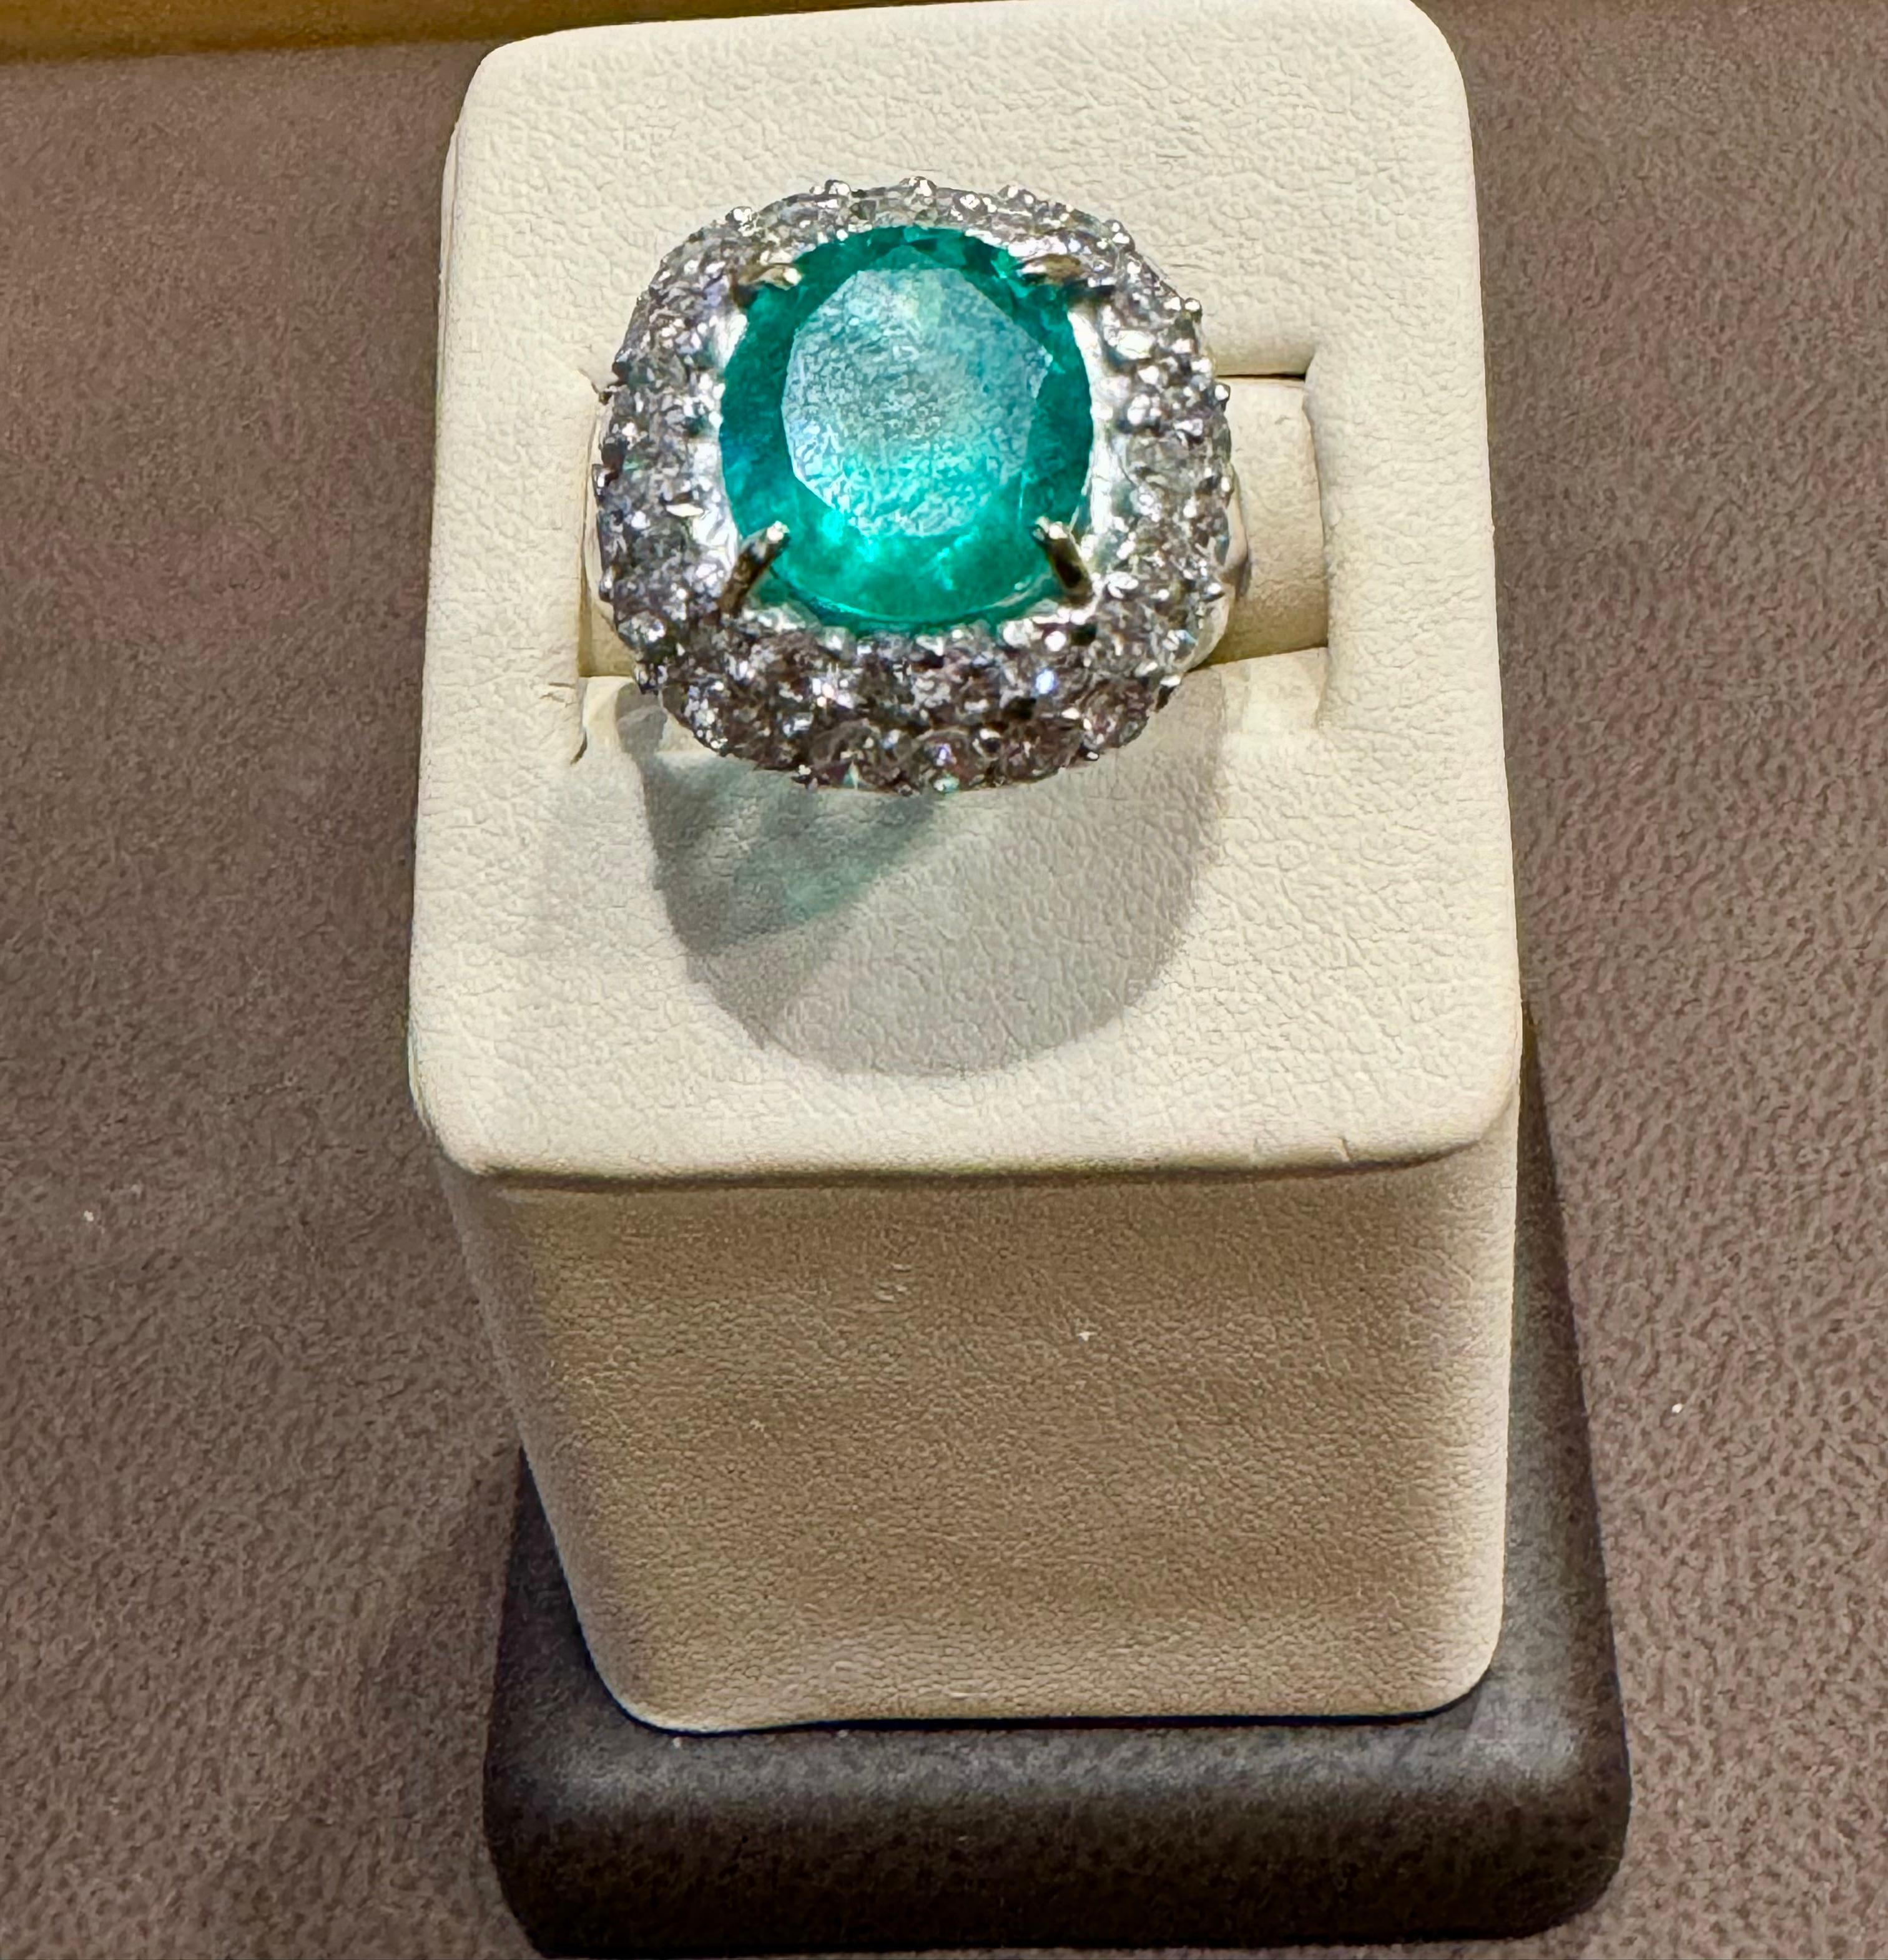 7 Carat Cushion Cut Colombian Emerald & 3.5 Ct Diamond Ring in Platinum Size 6.2 For Sale 1